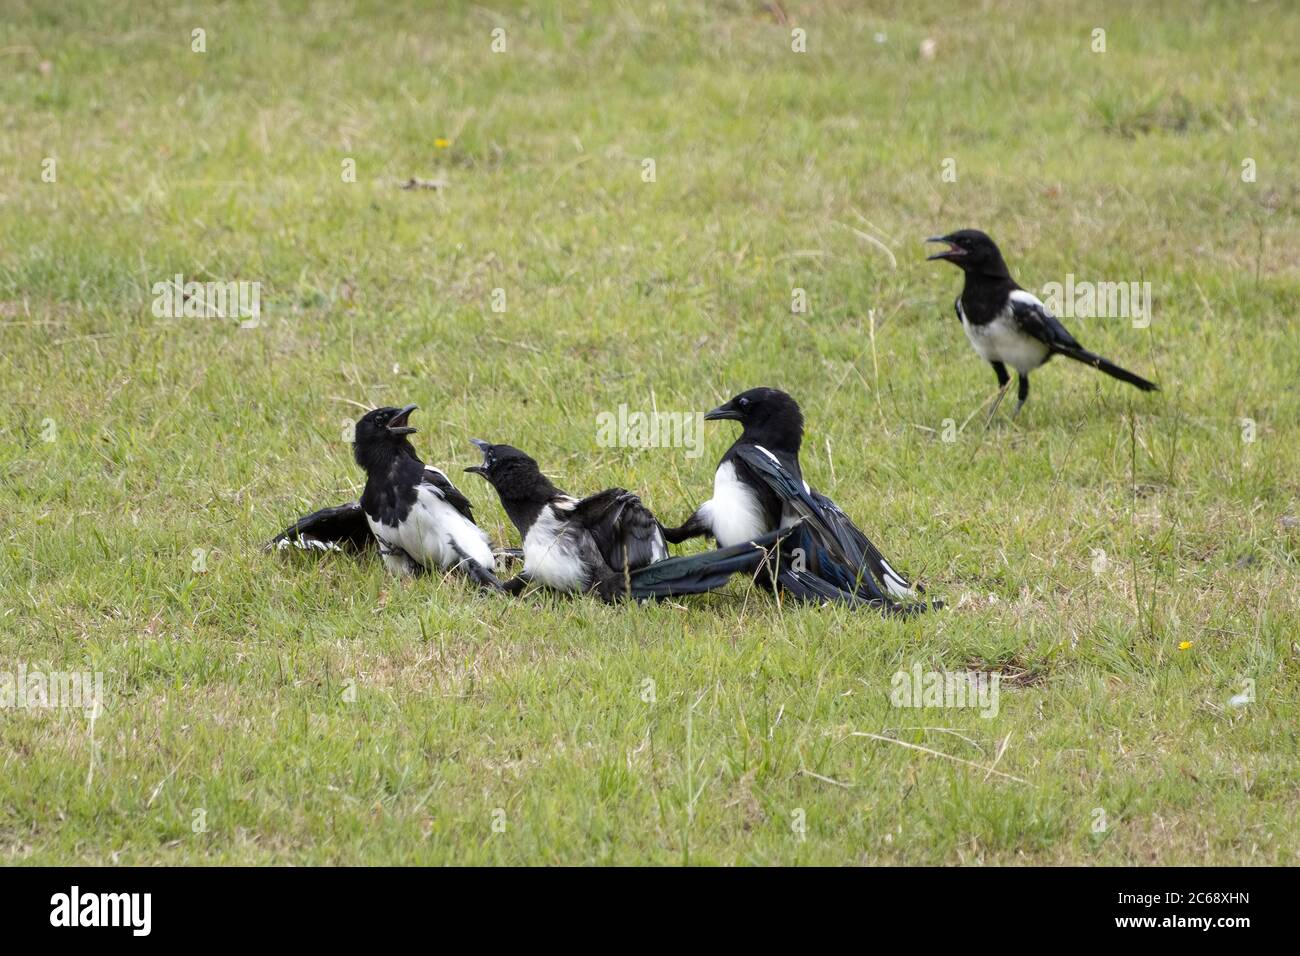 Common Magpies fighting in a field near East Grinstead Stock Photo